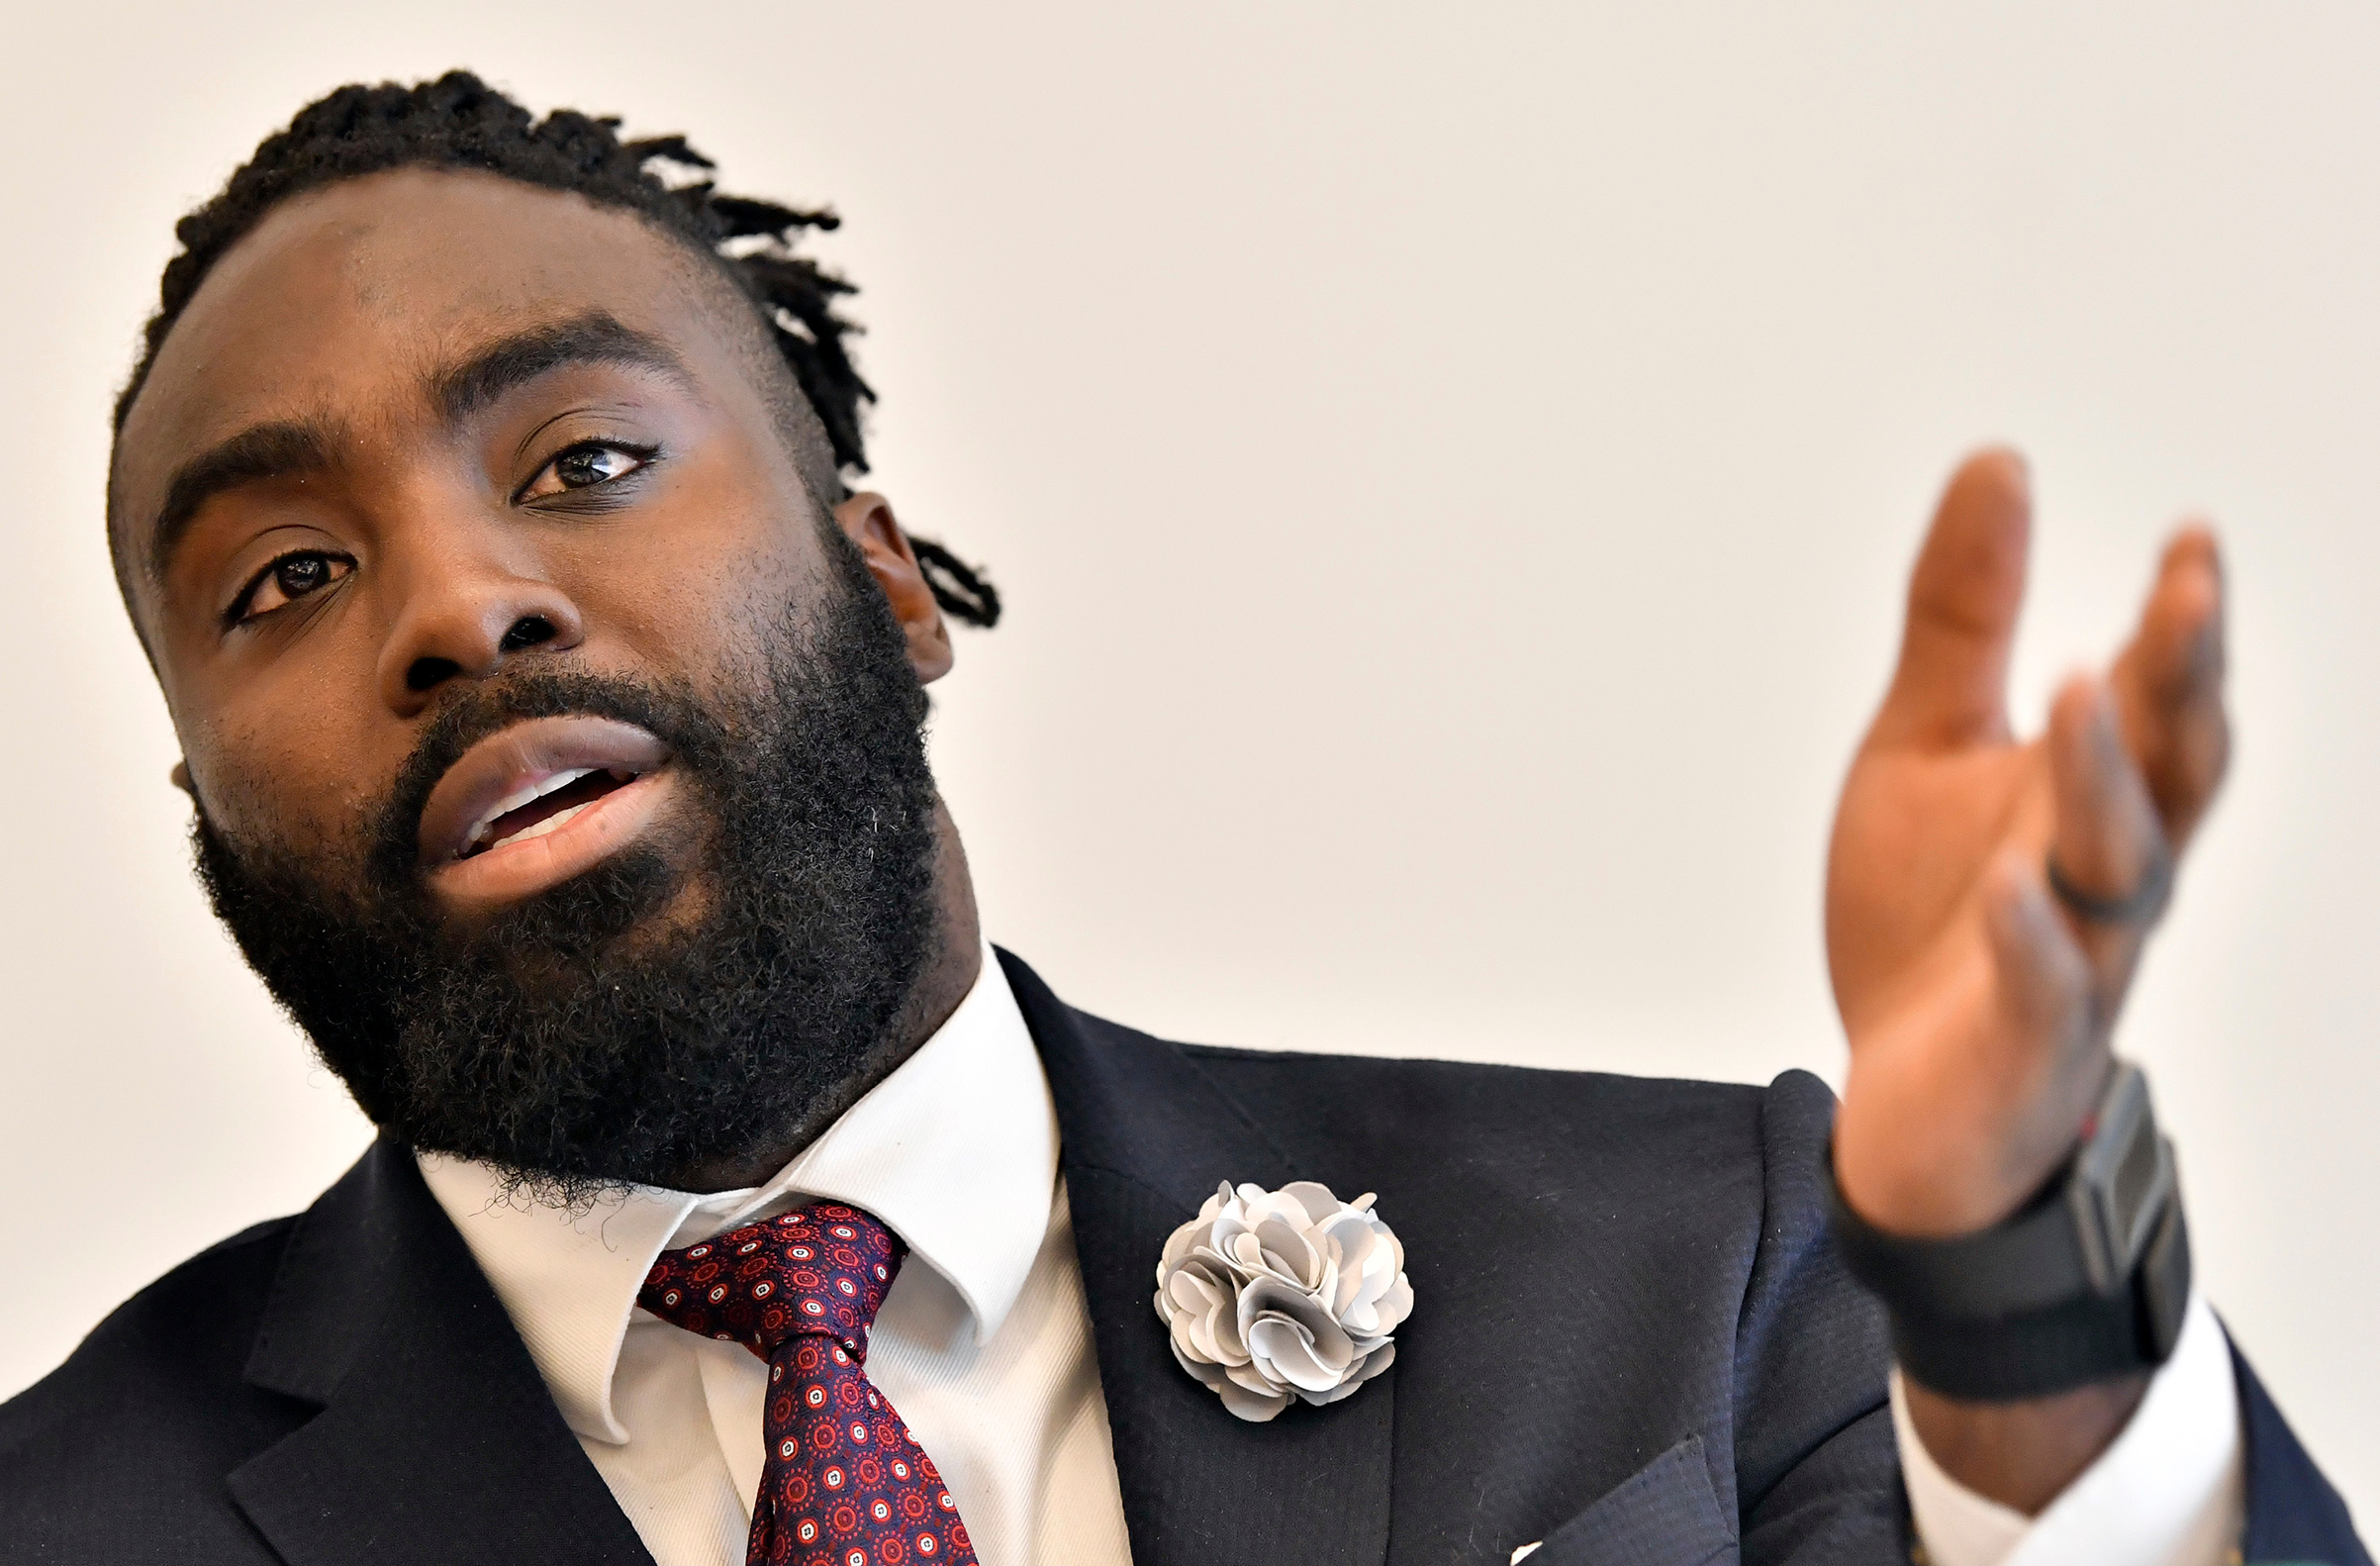 New Orleans Saints' Demario Davis discusses criminal justice issues with other current and former NFL football players at Harvard Law School, in Cambridge, Mass. on March 23, 2018. (Josh Reynolds—AP/Shutterstock)